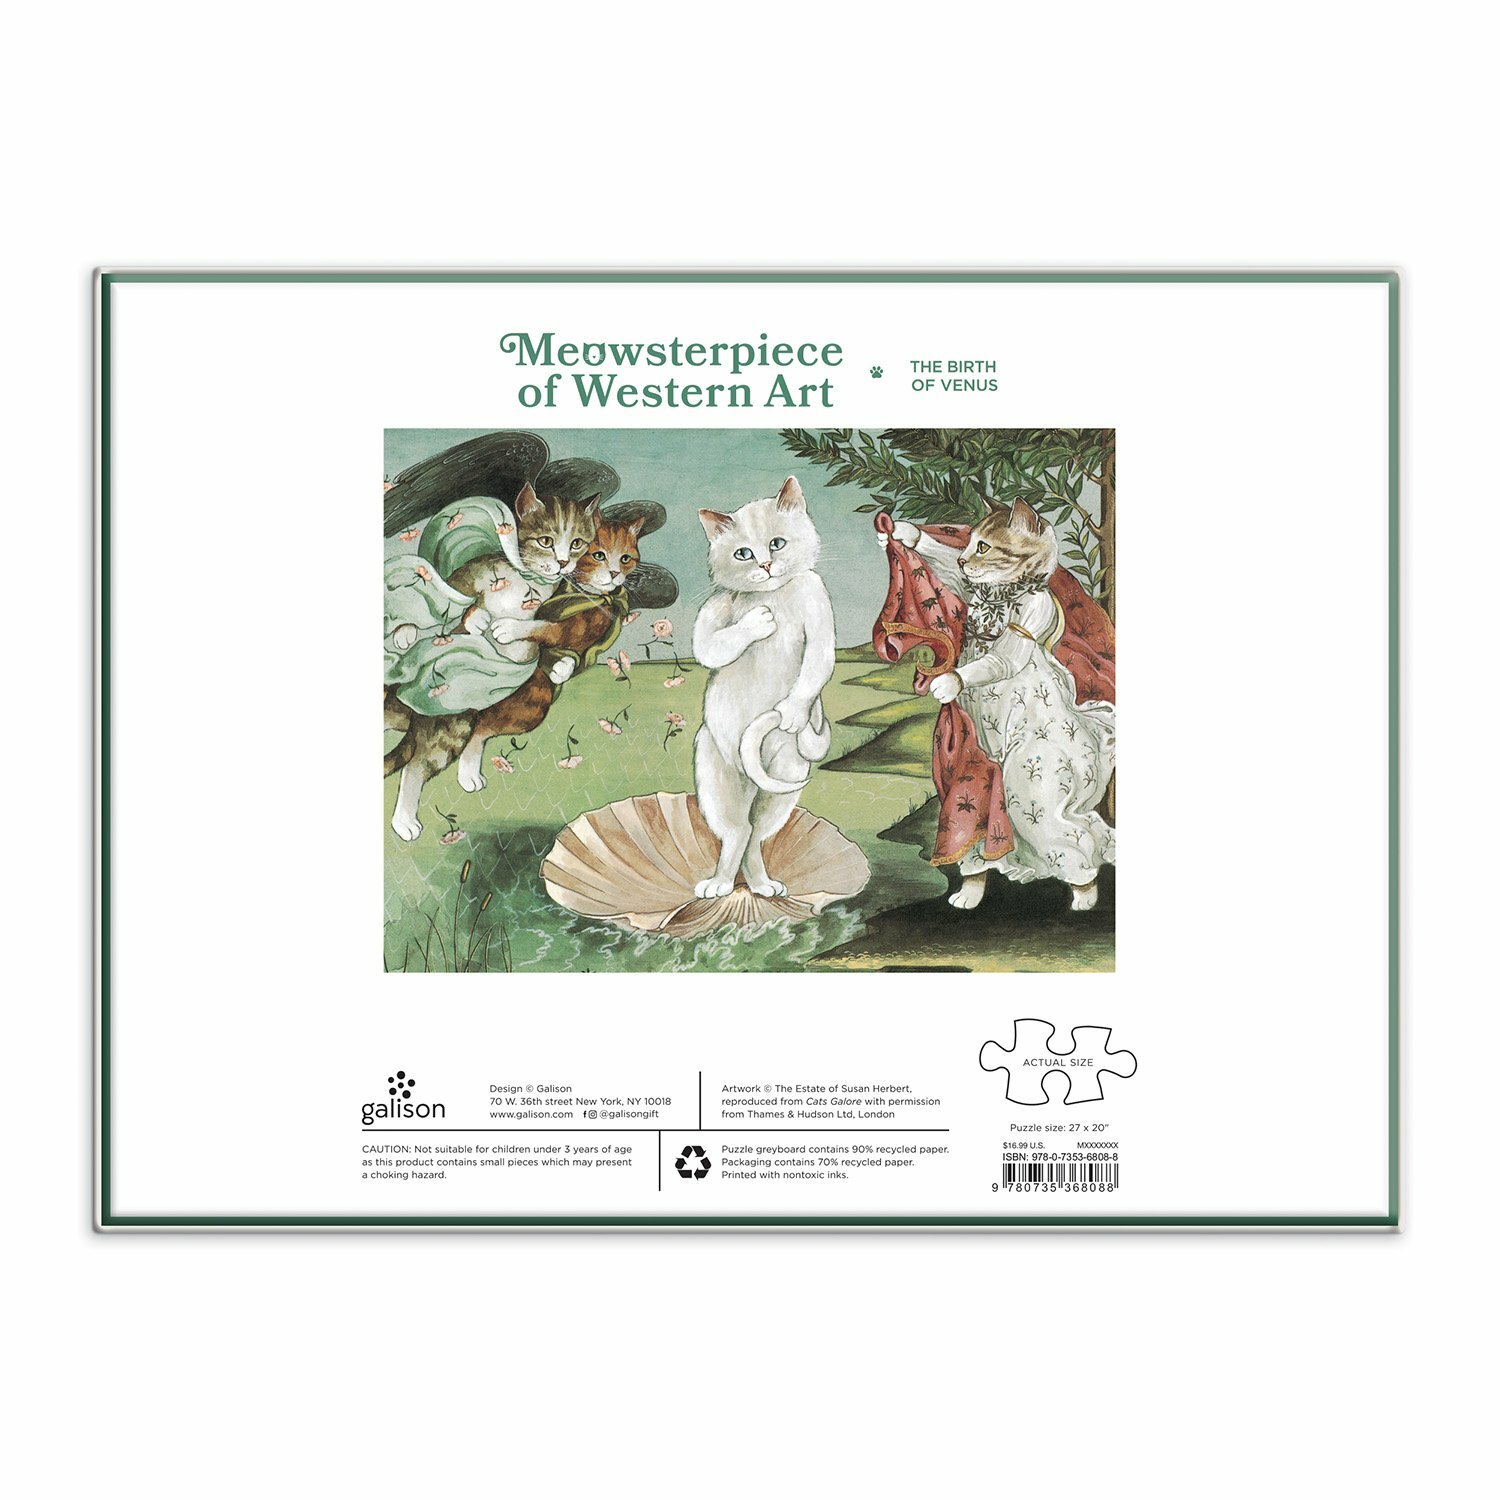 birth-of-venus-meowsterpiece-of-western-art-1000-piece-puzzle-1000-piece-puzzles-meowsterpiece-of-western-collection-555938_2400x.jpg